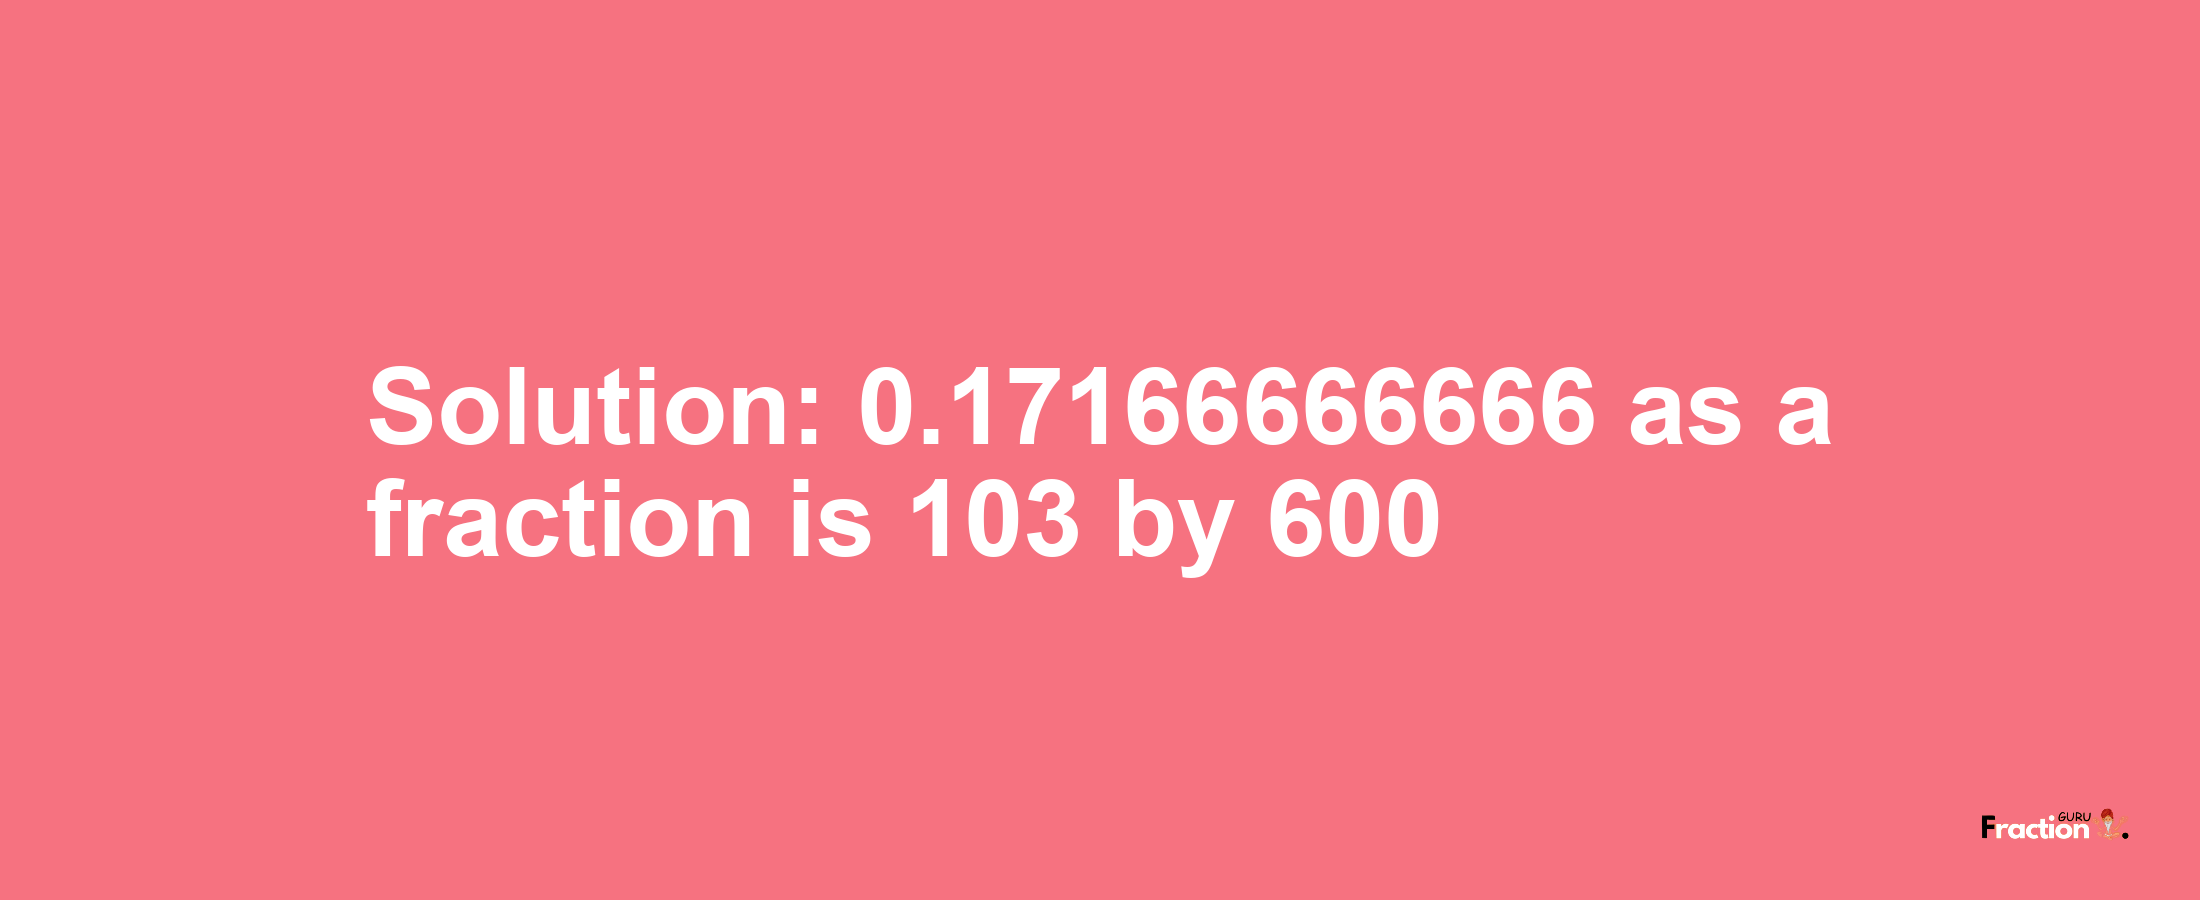 Solution:0.17166666666 as a fraction is 103/600